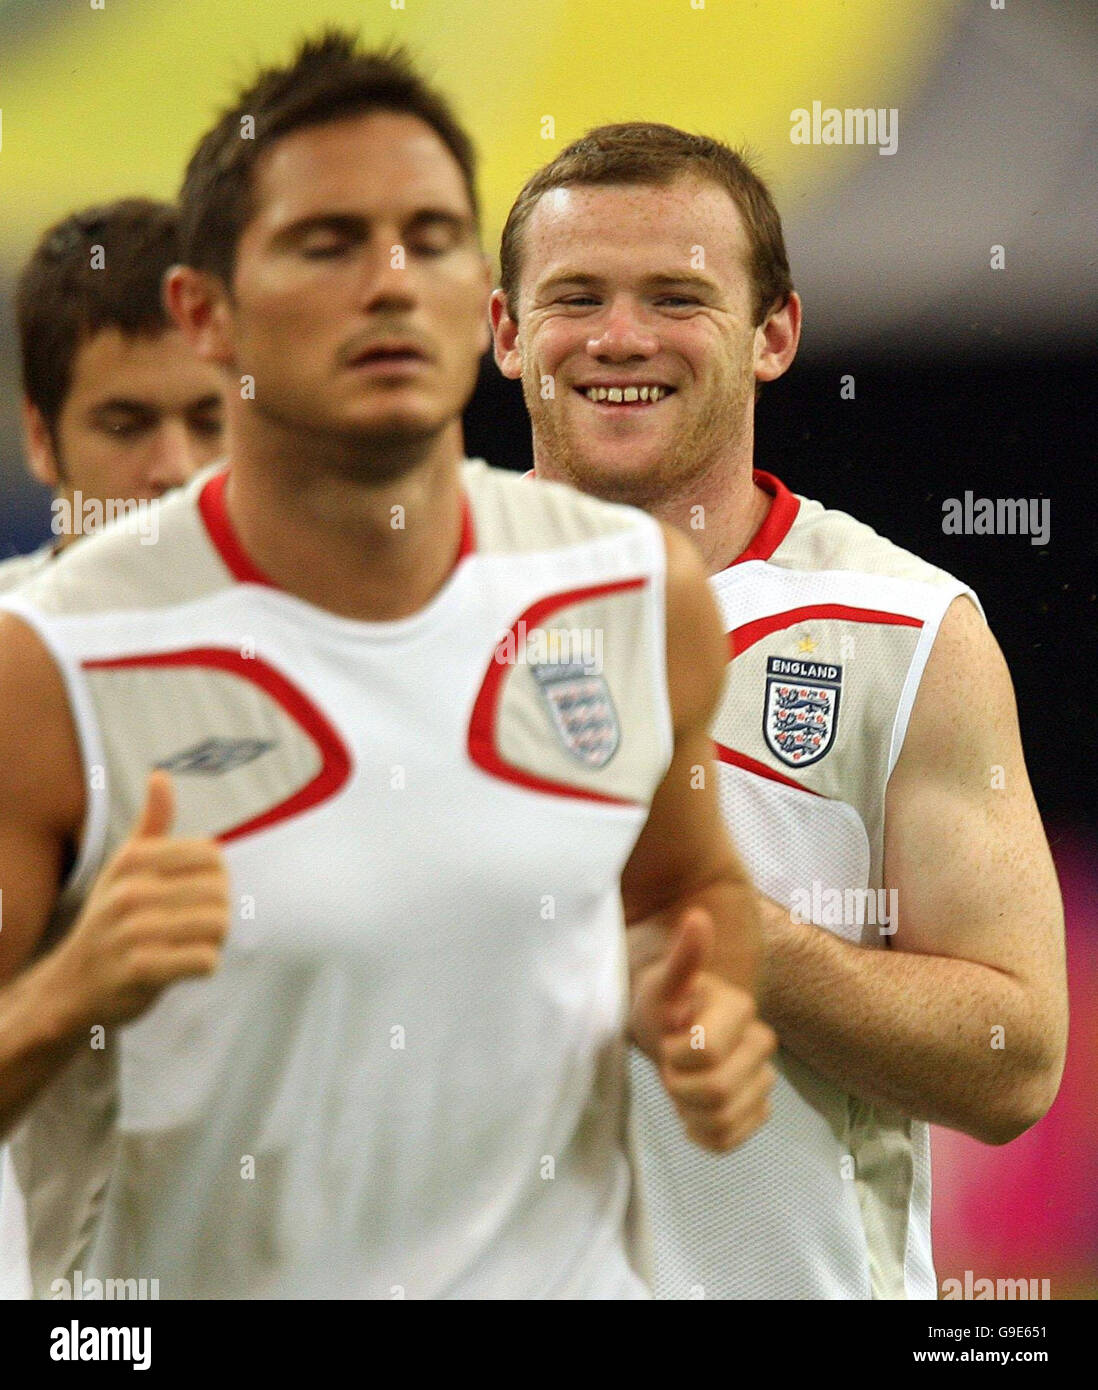 England's Wayne Rooney during a training session at the FIFA World Cup Stadium in Gelsenkirchen, Germany. Picture date: Friday June 30, 2006. England play Portugal in their Quarter Final match tomorrow. Photo credit should read: Owen Humphreys/PA. Stock Photo